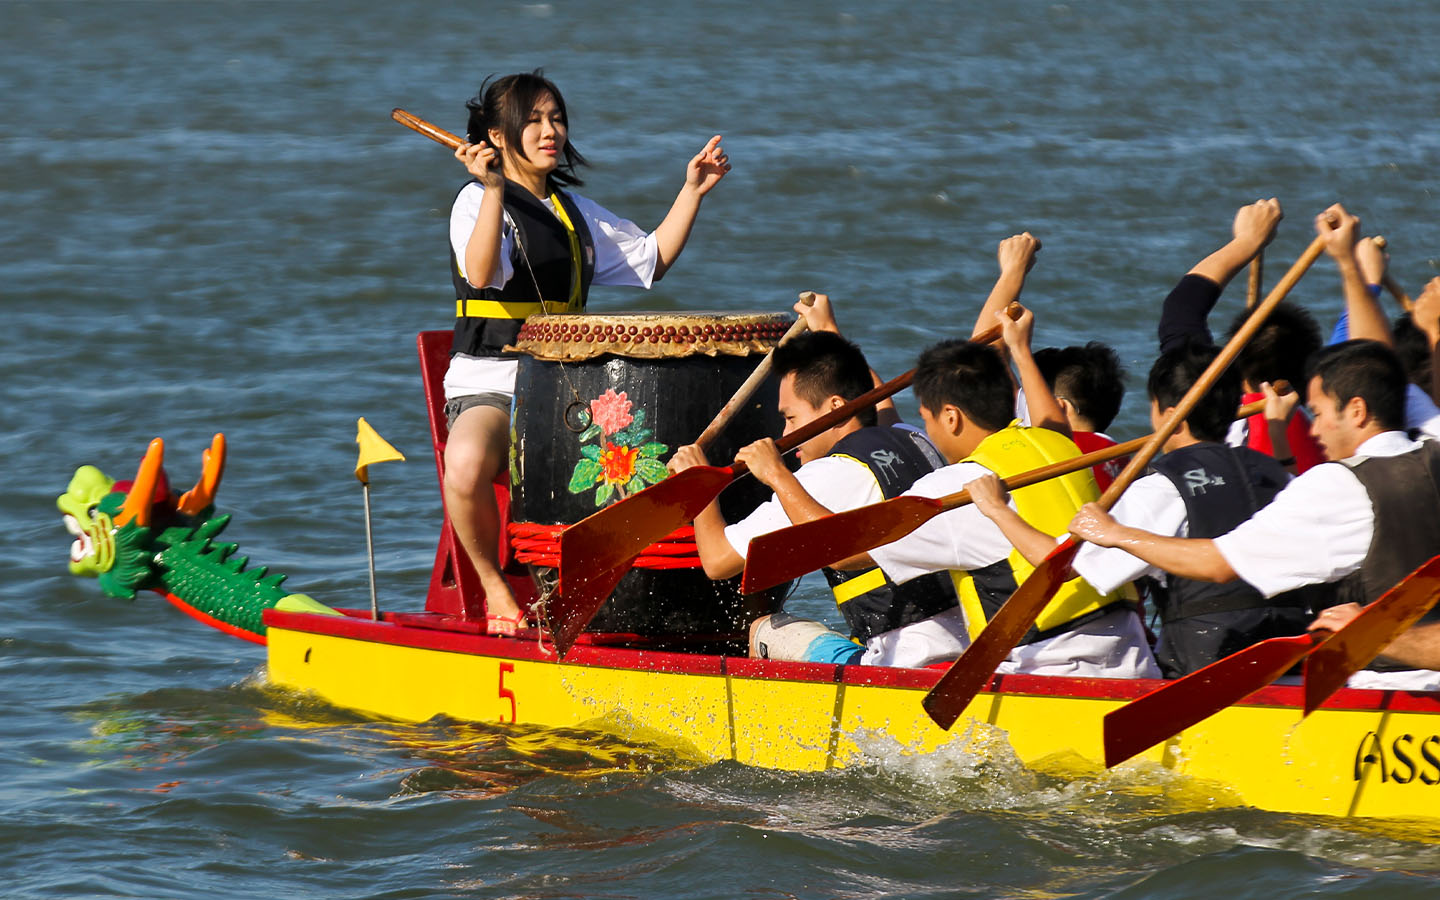 The International Dragon Boat Races are returning this June 